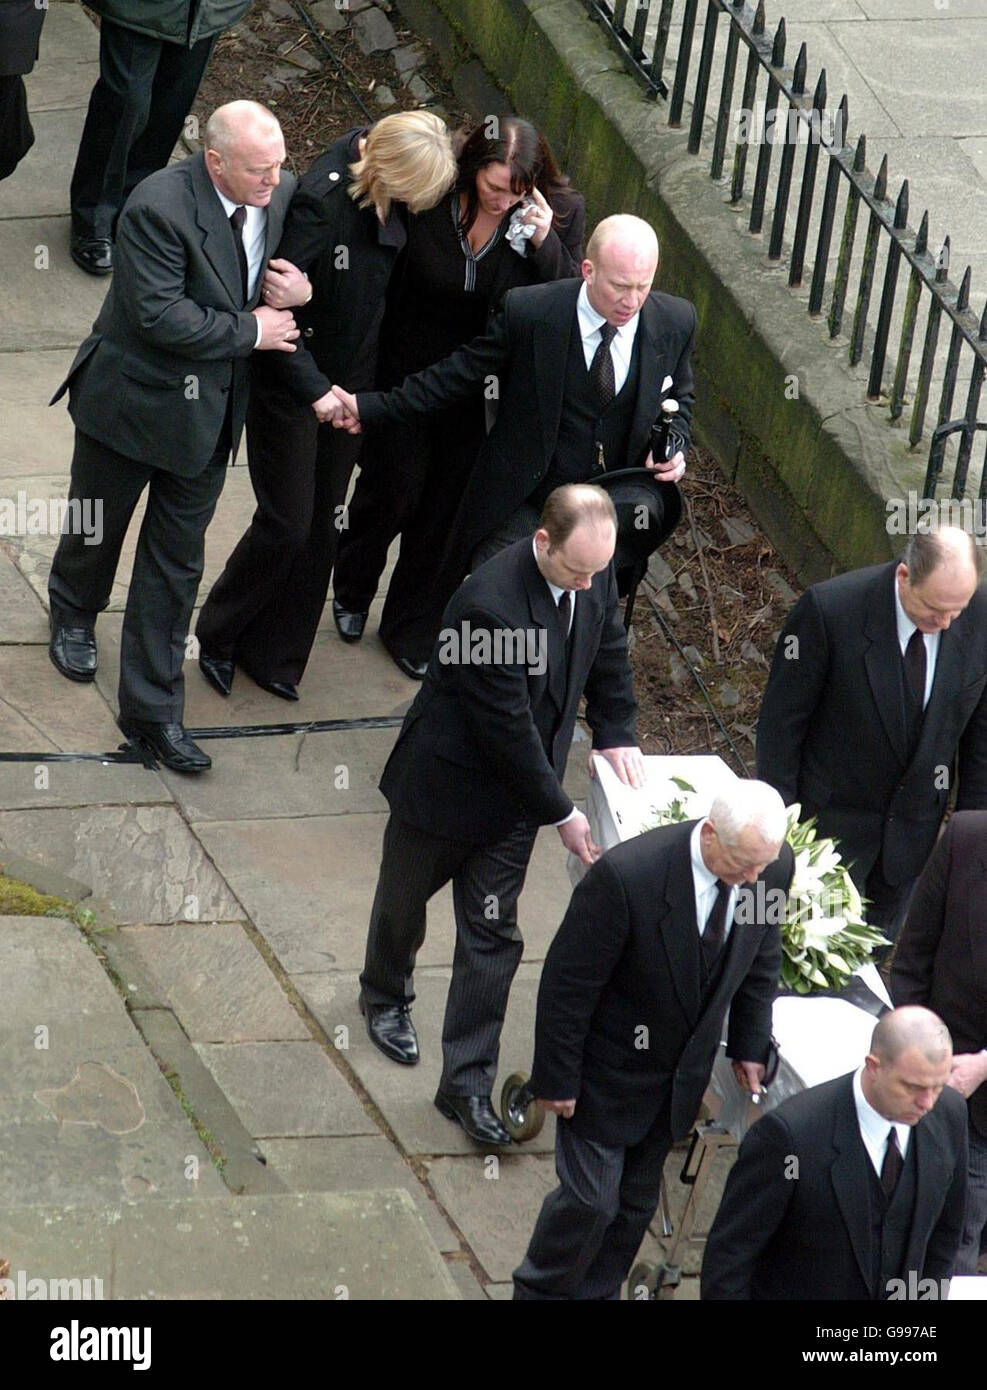 Mandy Carter (blonde hair) follows the funeral cortege of her three children, Samantha, Patricia and Marcus Carter, as it arrives at St. Edward's Church in Leek, Staffordshire, Thursday April 6, 2006. The siblings died in an alleged arson attack at their semi-detached house in Hillside Road, Cheddleton, on March 9, with their mother's partner Roderick Hine. See PA story FUNERAL Children. Stock Photo